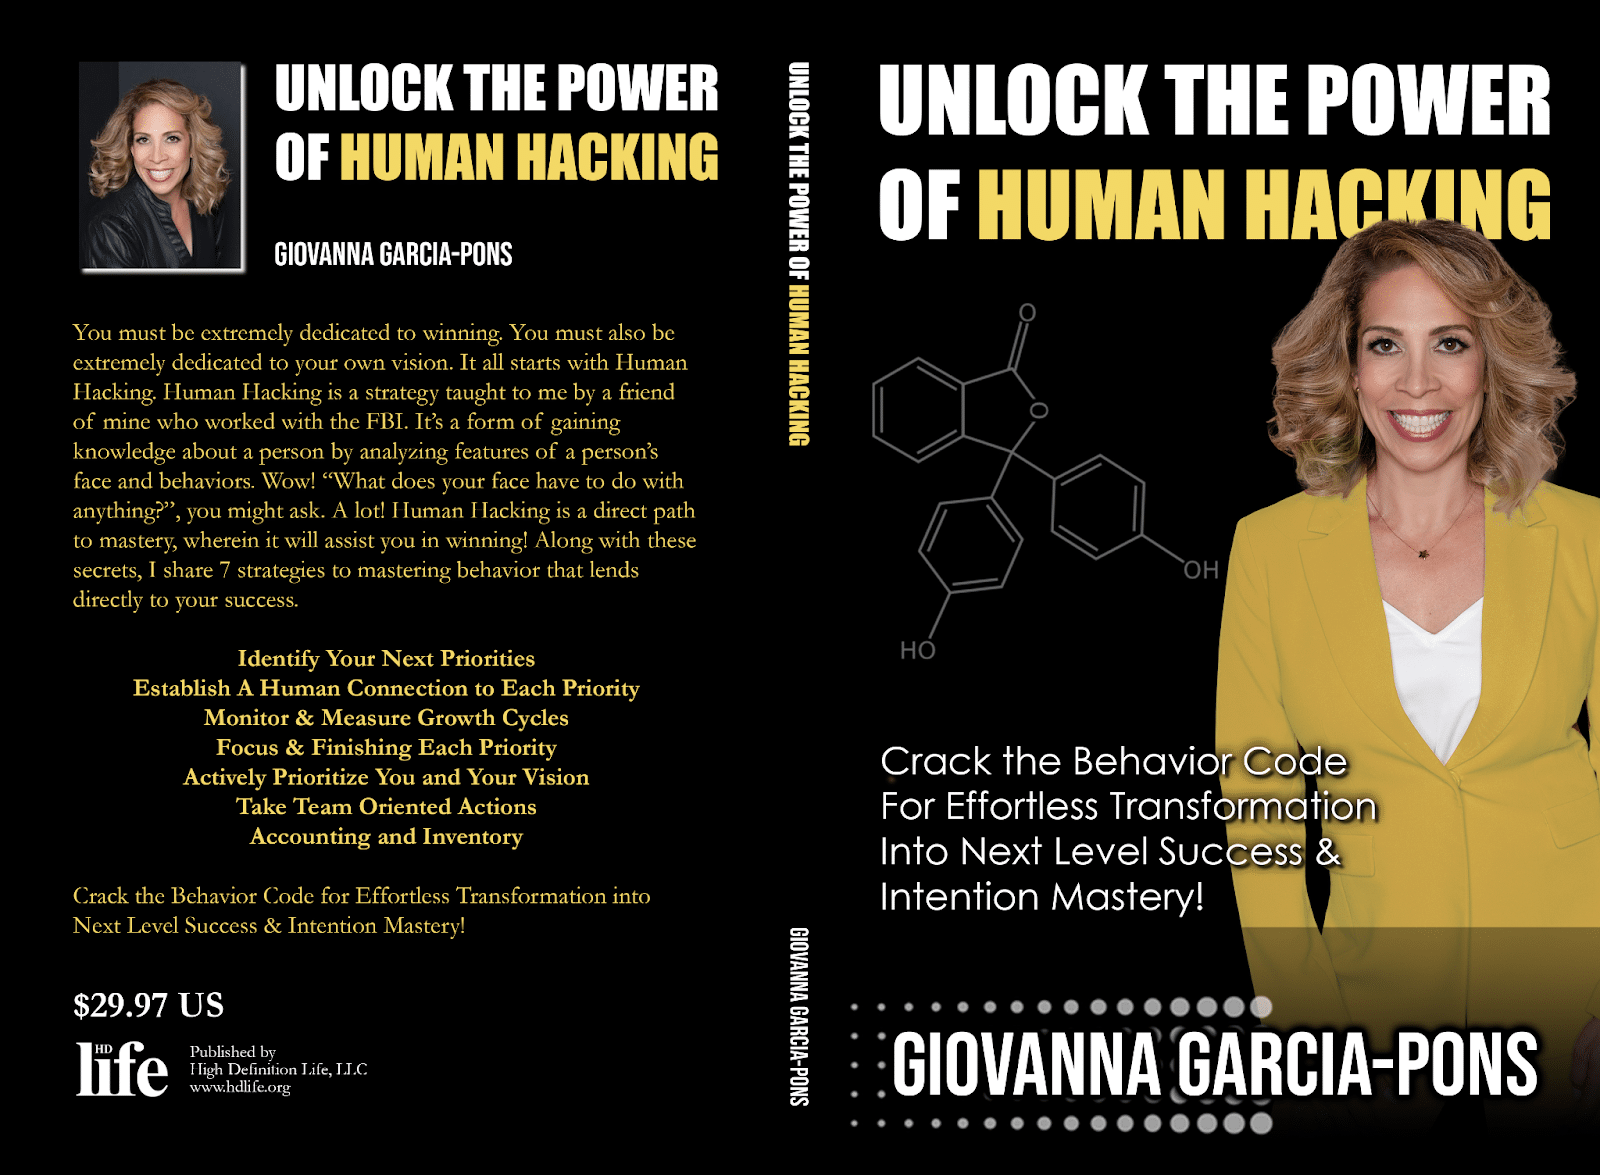 Unlocking Human Potential- Giovanna Garcia-Pons Redefines Success in Her Upcoming Book